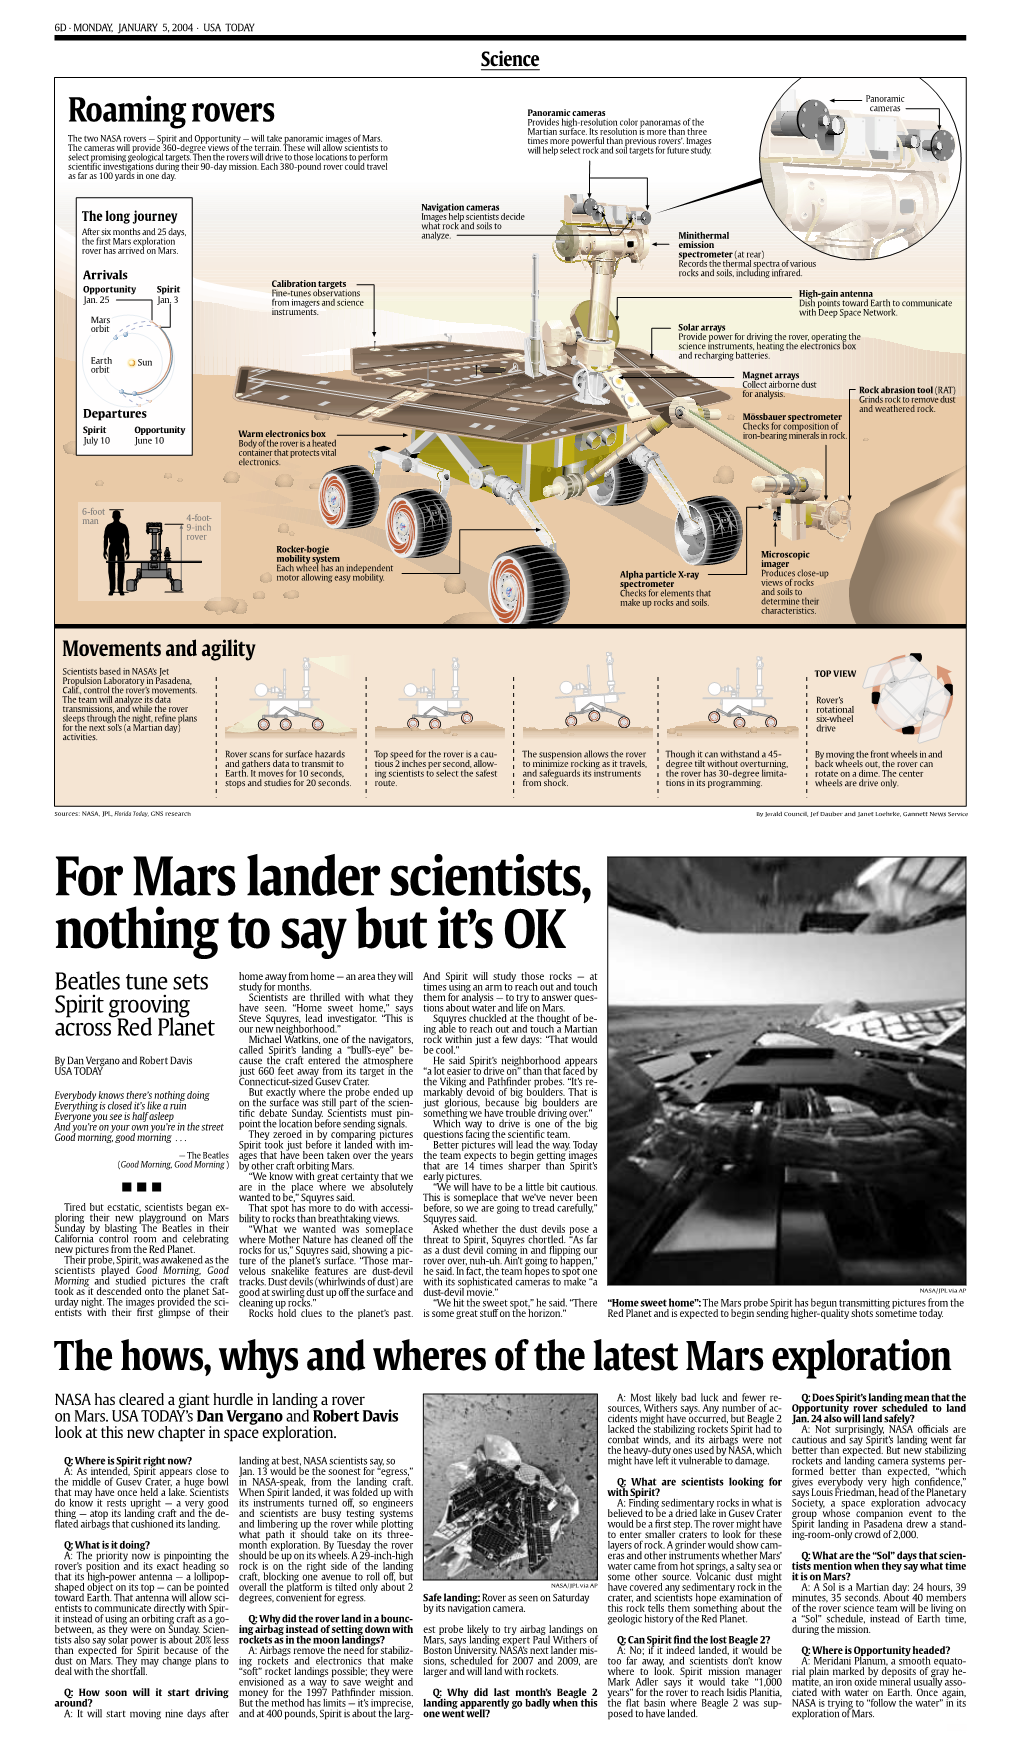 For Mars Lander Scientists, Nothing to Say but It's OK